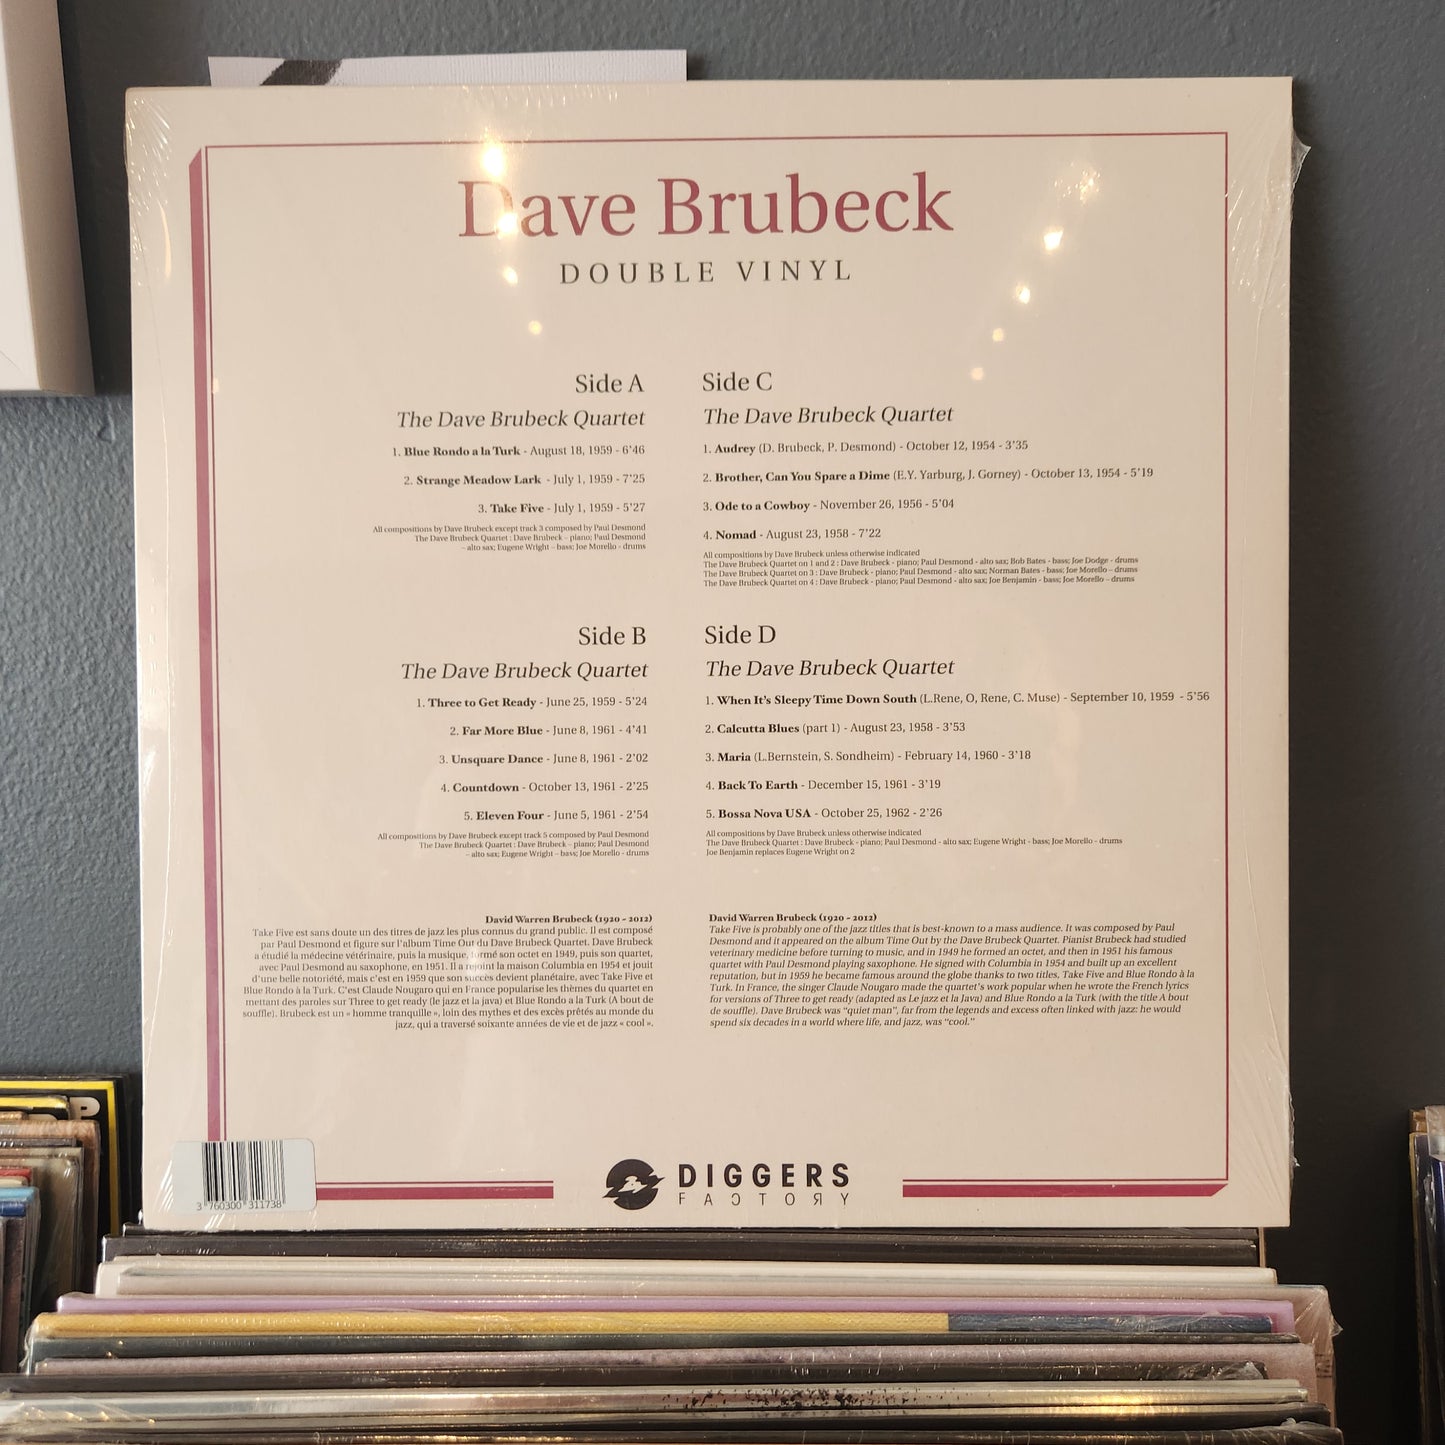 Dave Brubeck - The Essential Works: 1954 - 1962(2LP)